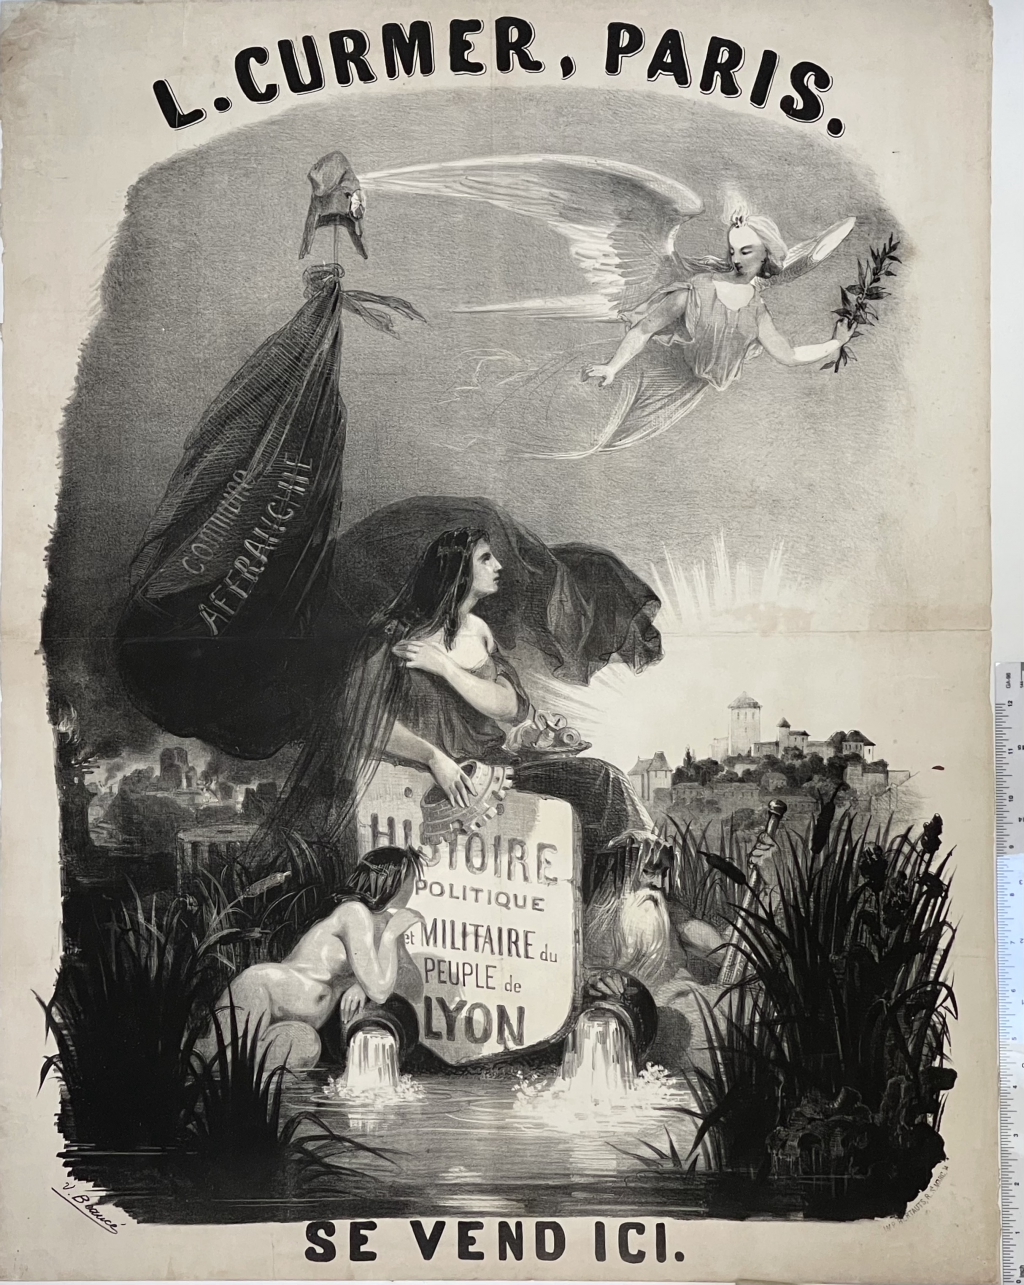 One of the earliest large lithographed posters advertising a book for sale. Signed V. Beaucé in the lower left corner.